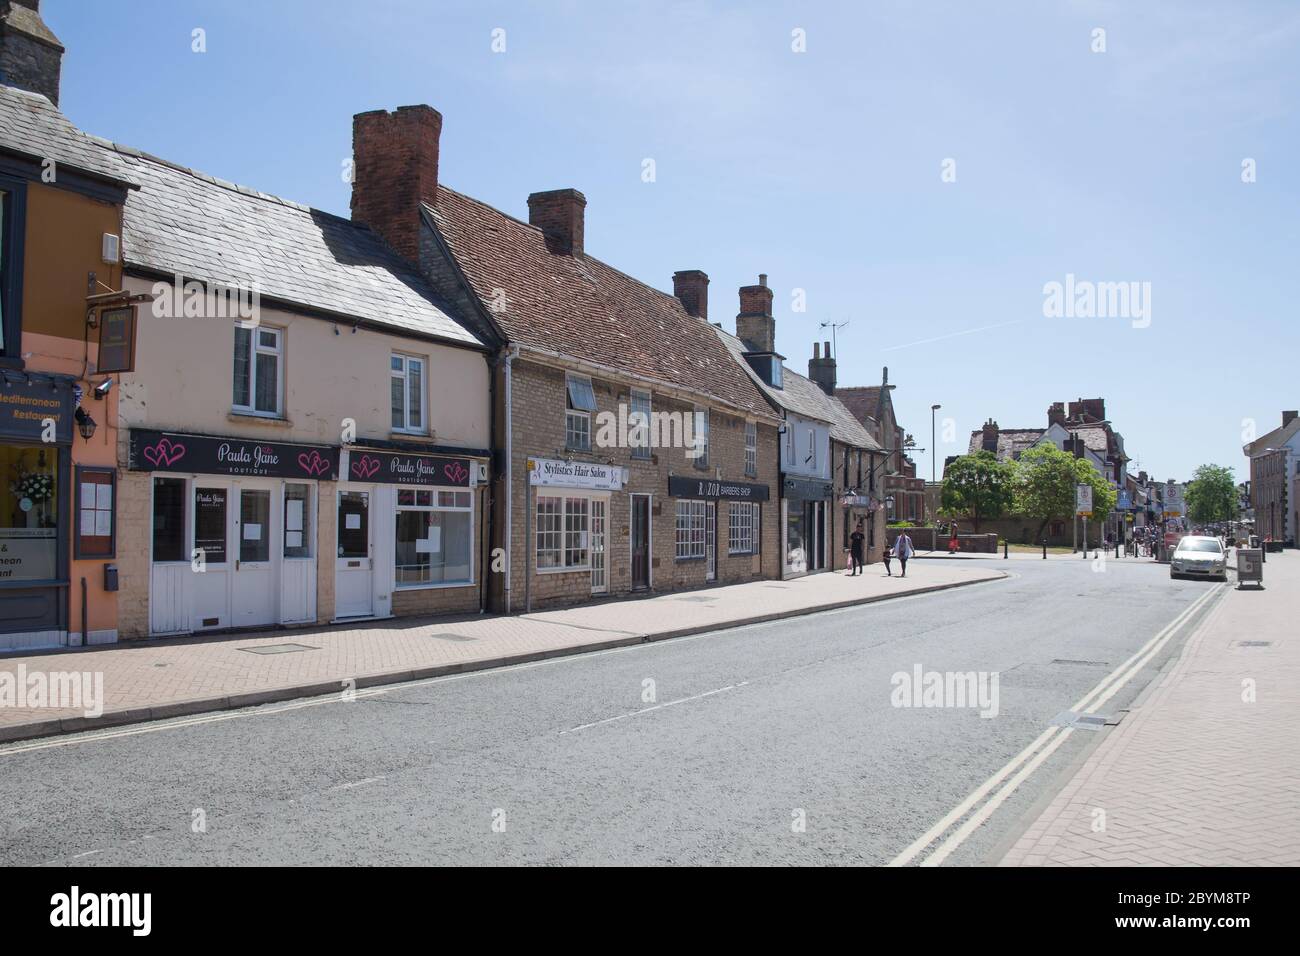 Business premises on Bell Lane in Bicester, Oxfordshire in the UK Stock Photo